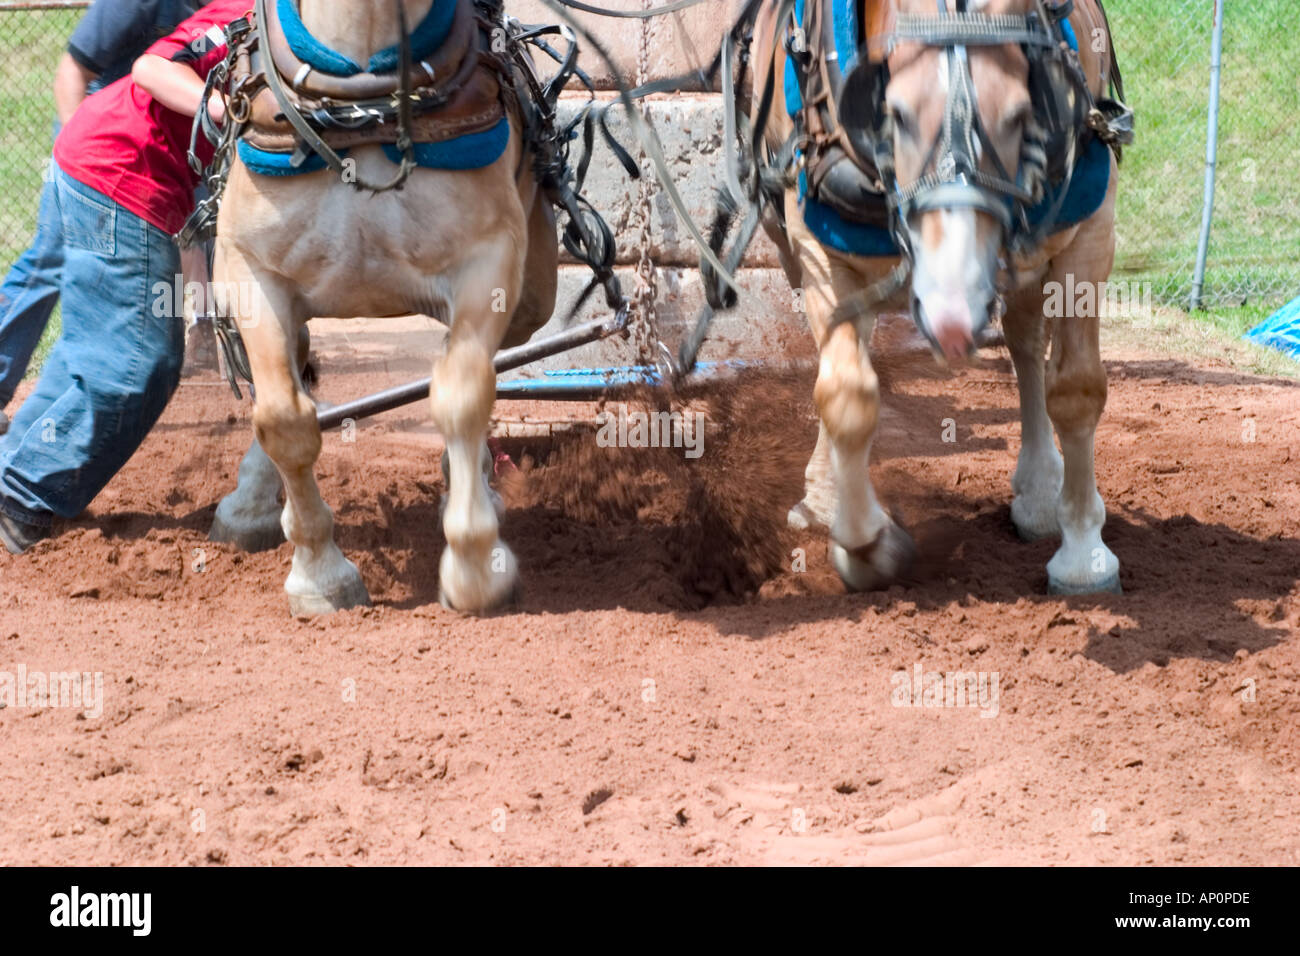 Horses at a fair in Connecticut USA competing in a horse pulling contest Stock Photo